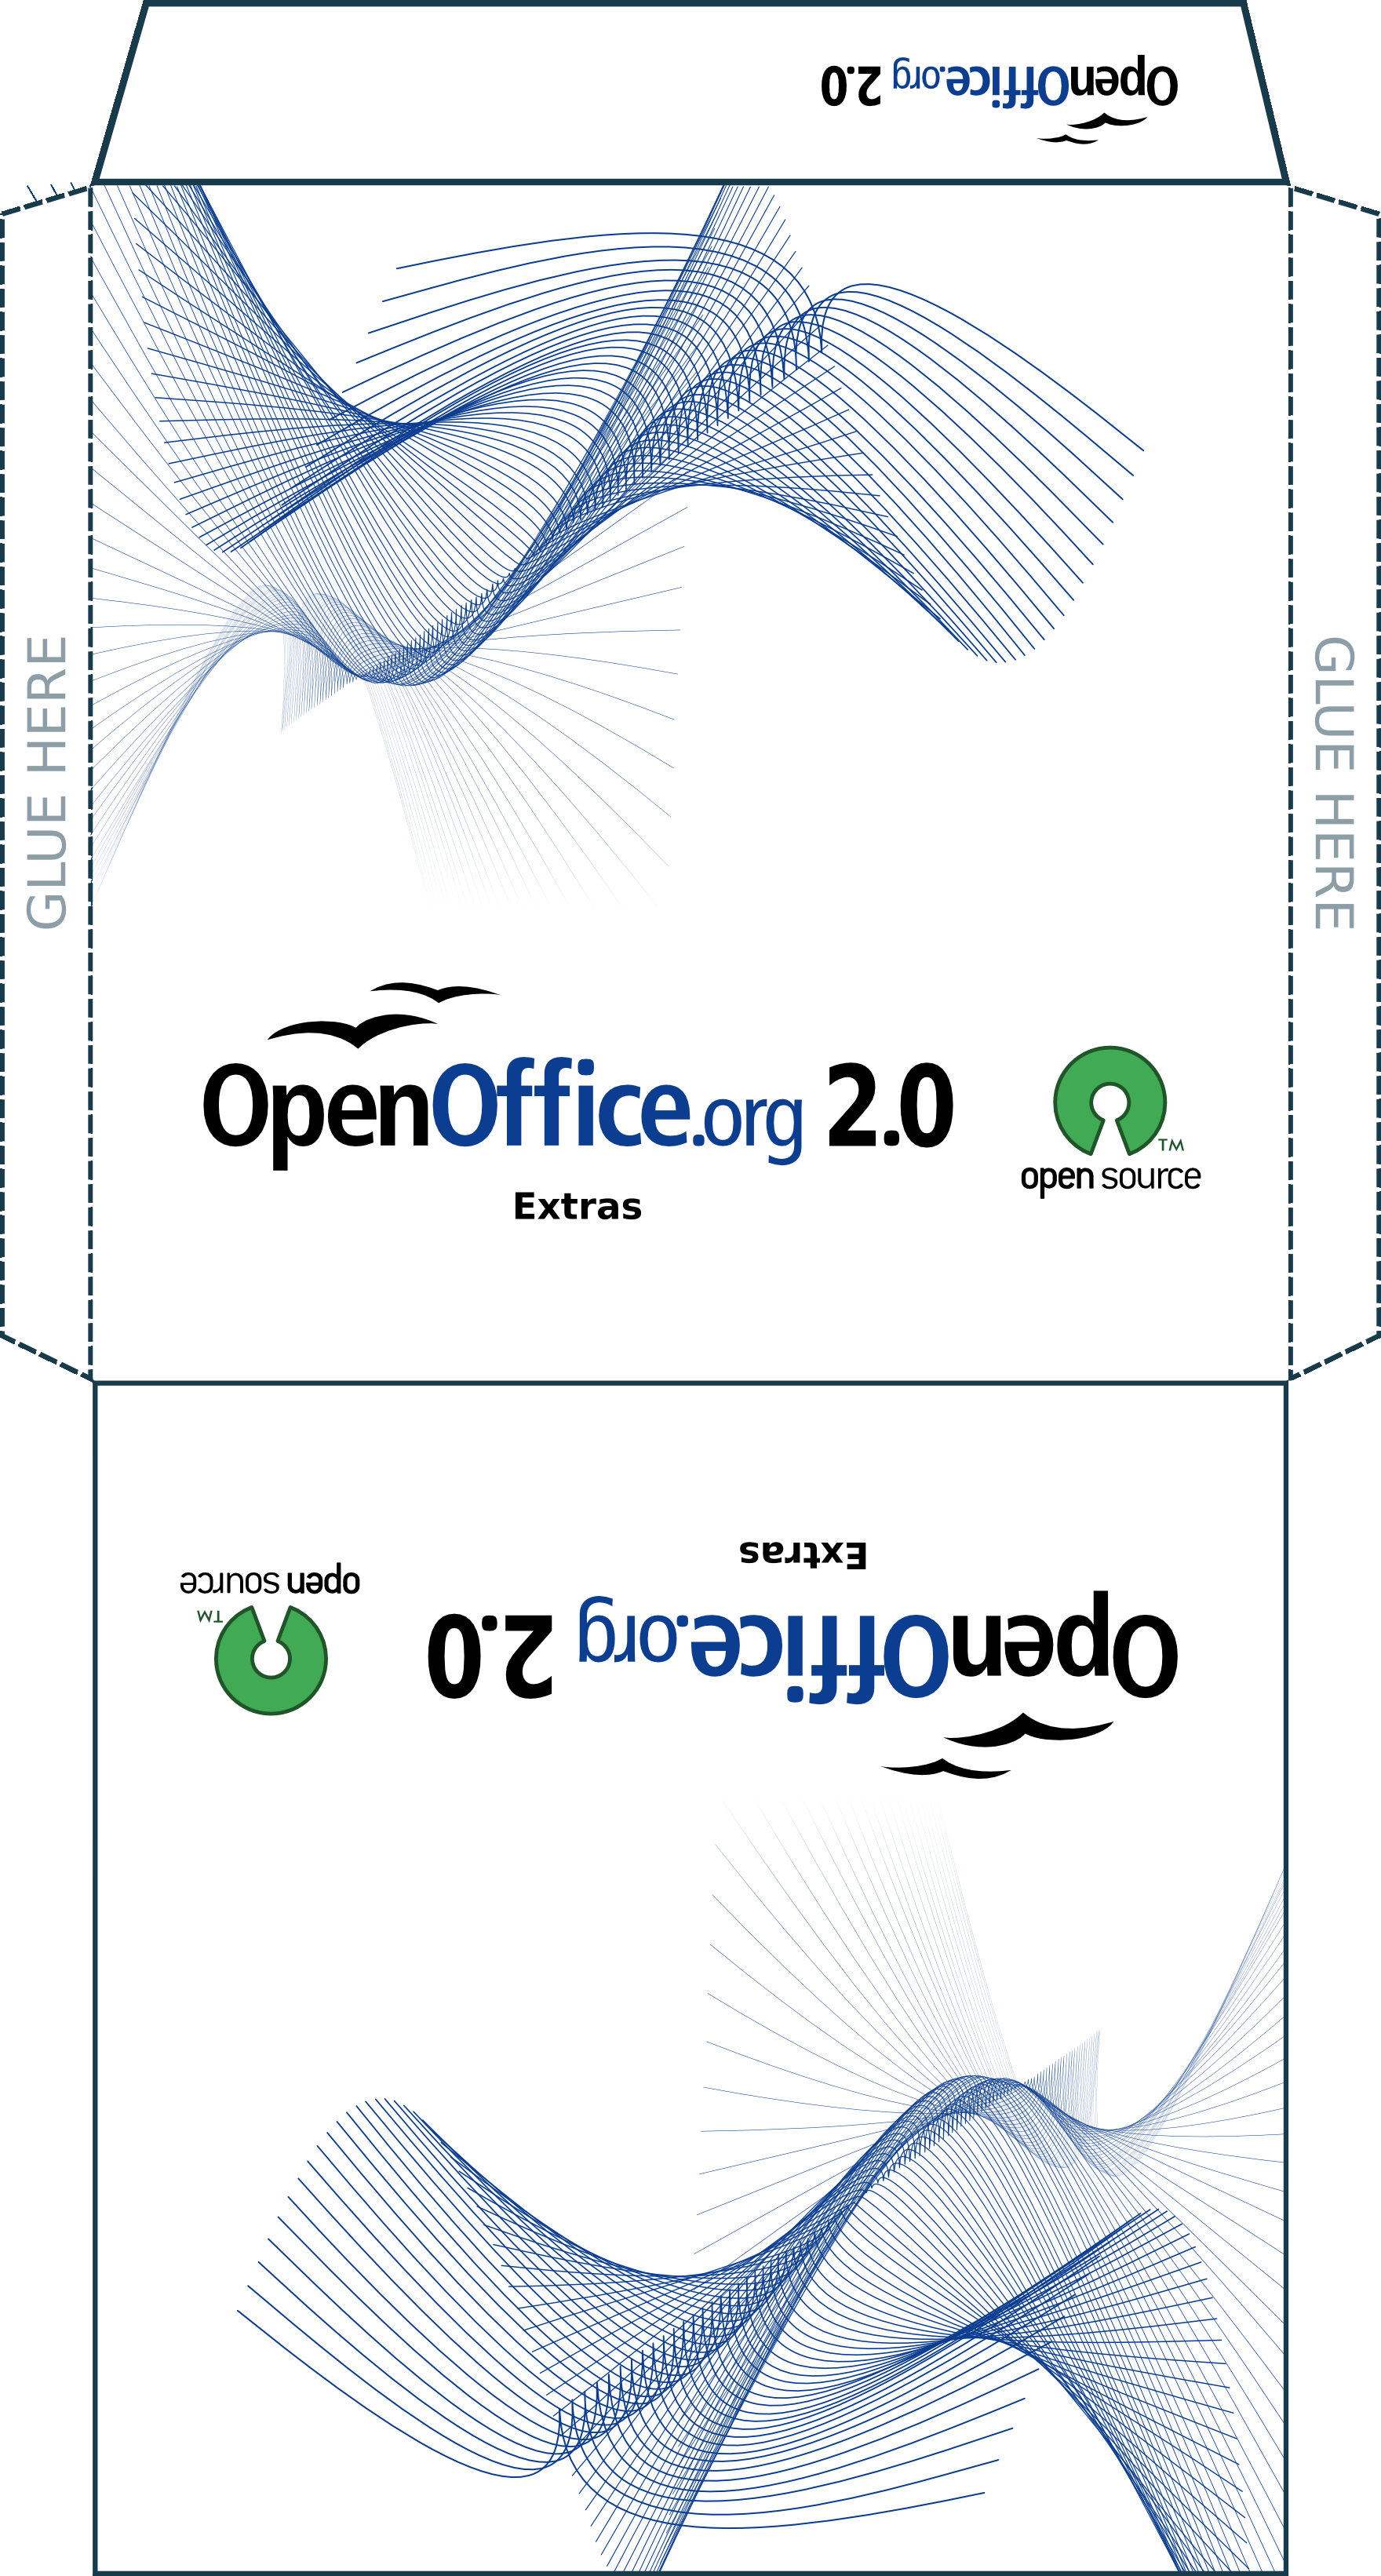 Paper Cd Sleeve Template from www.openoffice.org